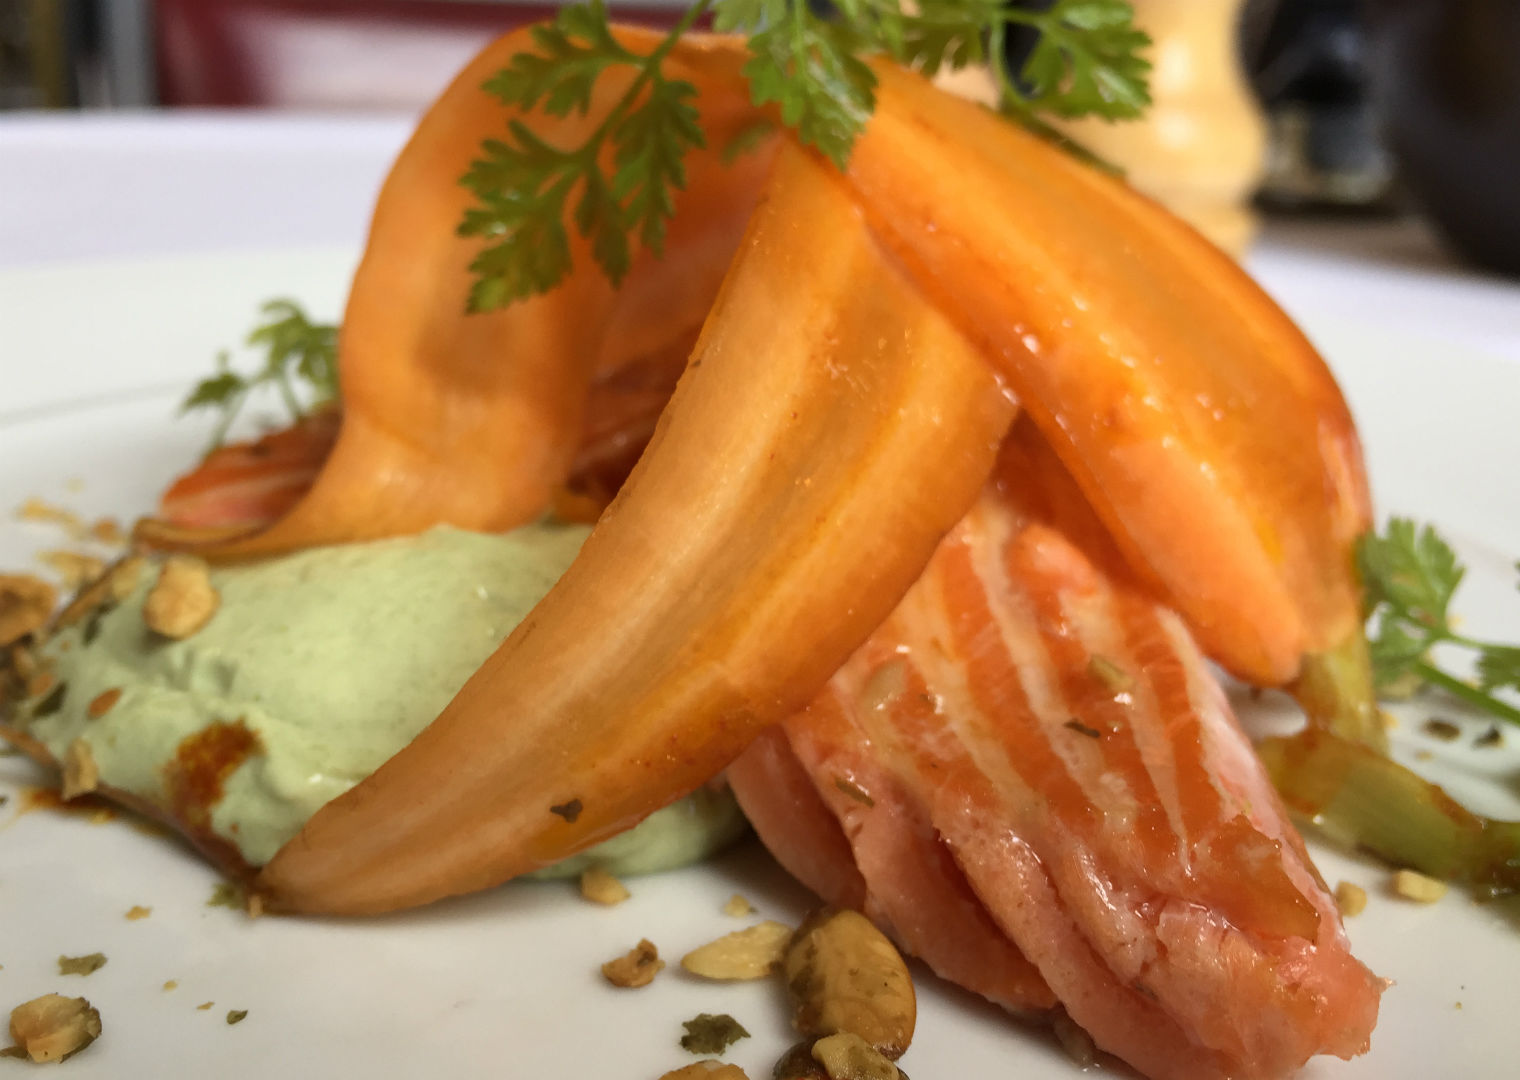 Smoked trout with chervil mousse. Photo:S E